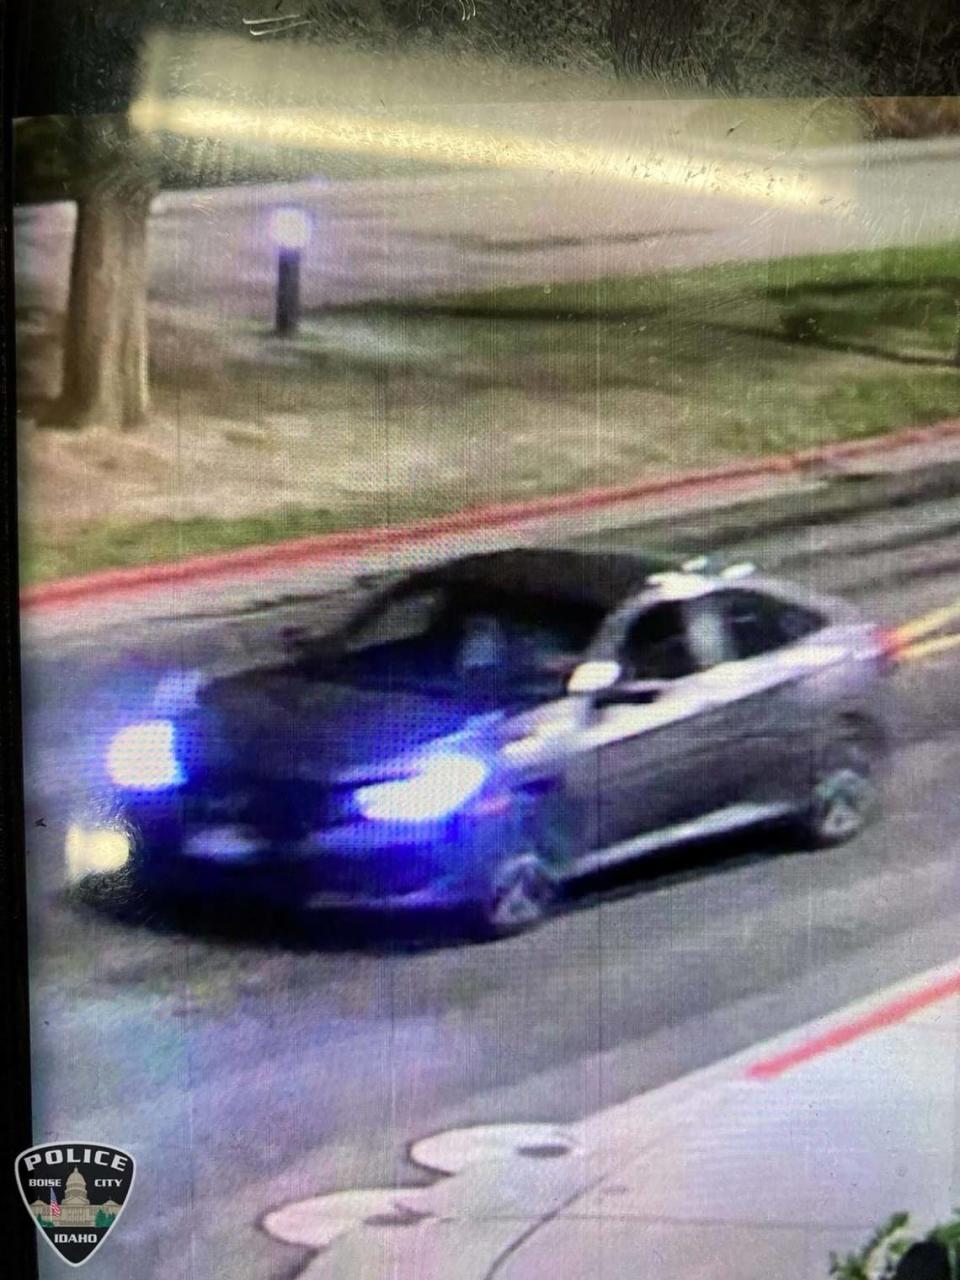 Police said Skylar Meade may be traveling in a gray four-door sedan, possibly a Honda Civic with Idaho license plates.